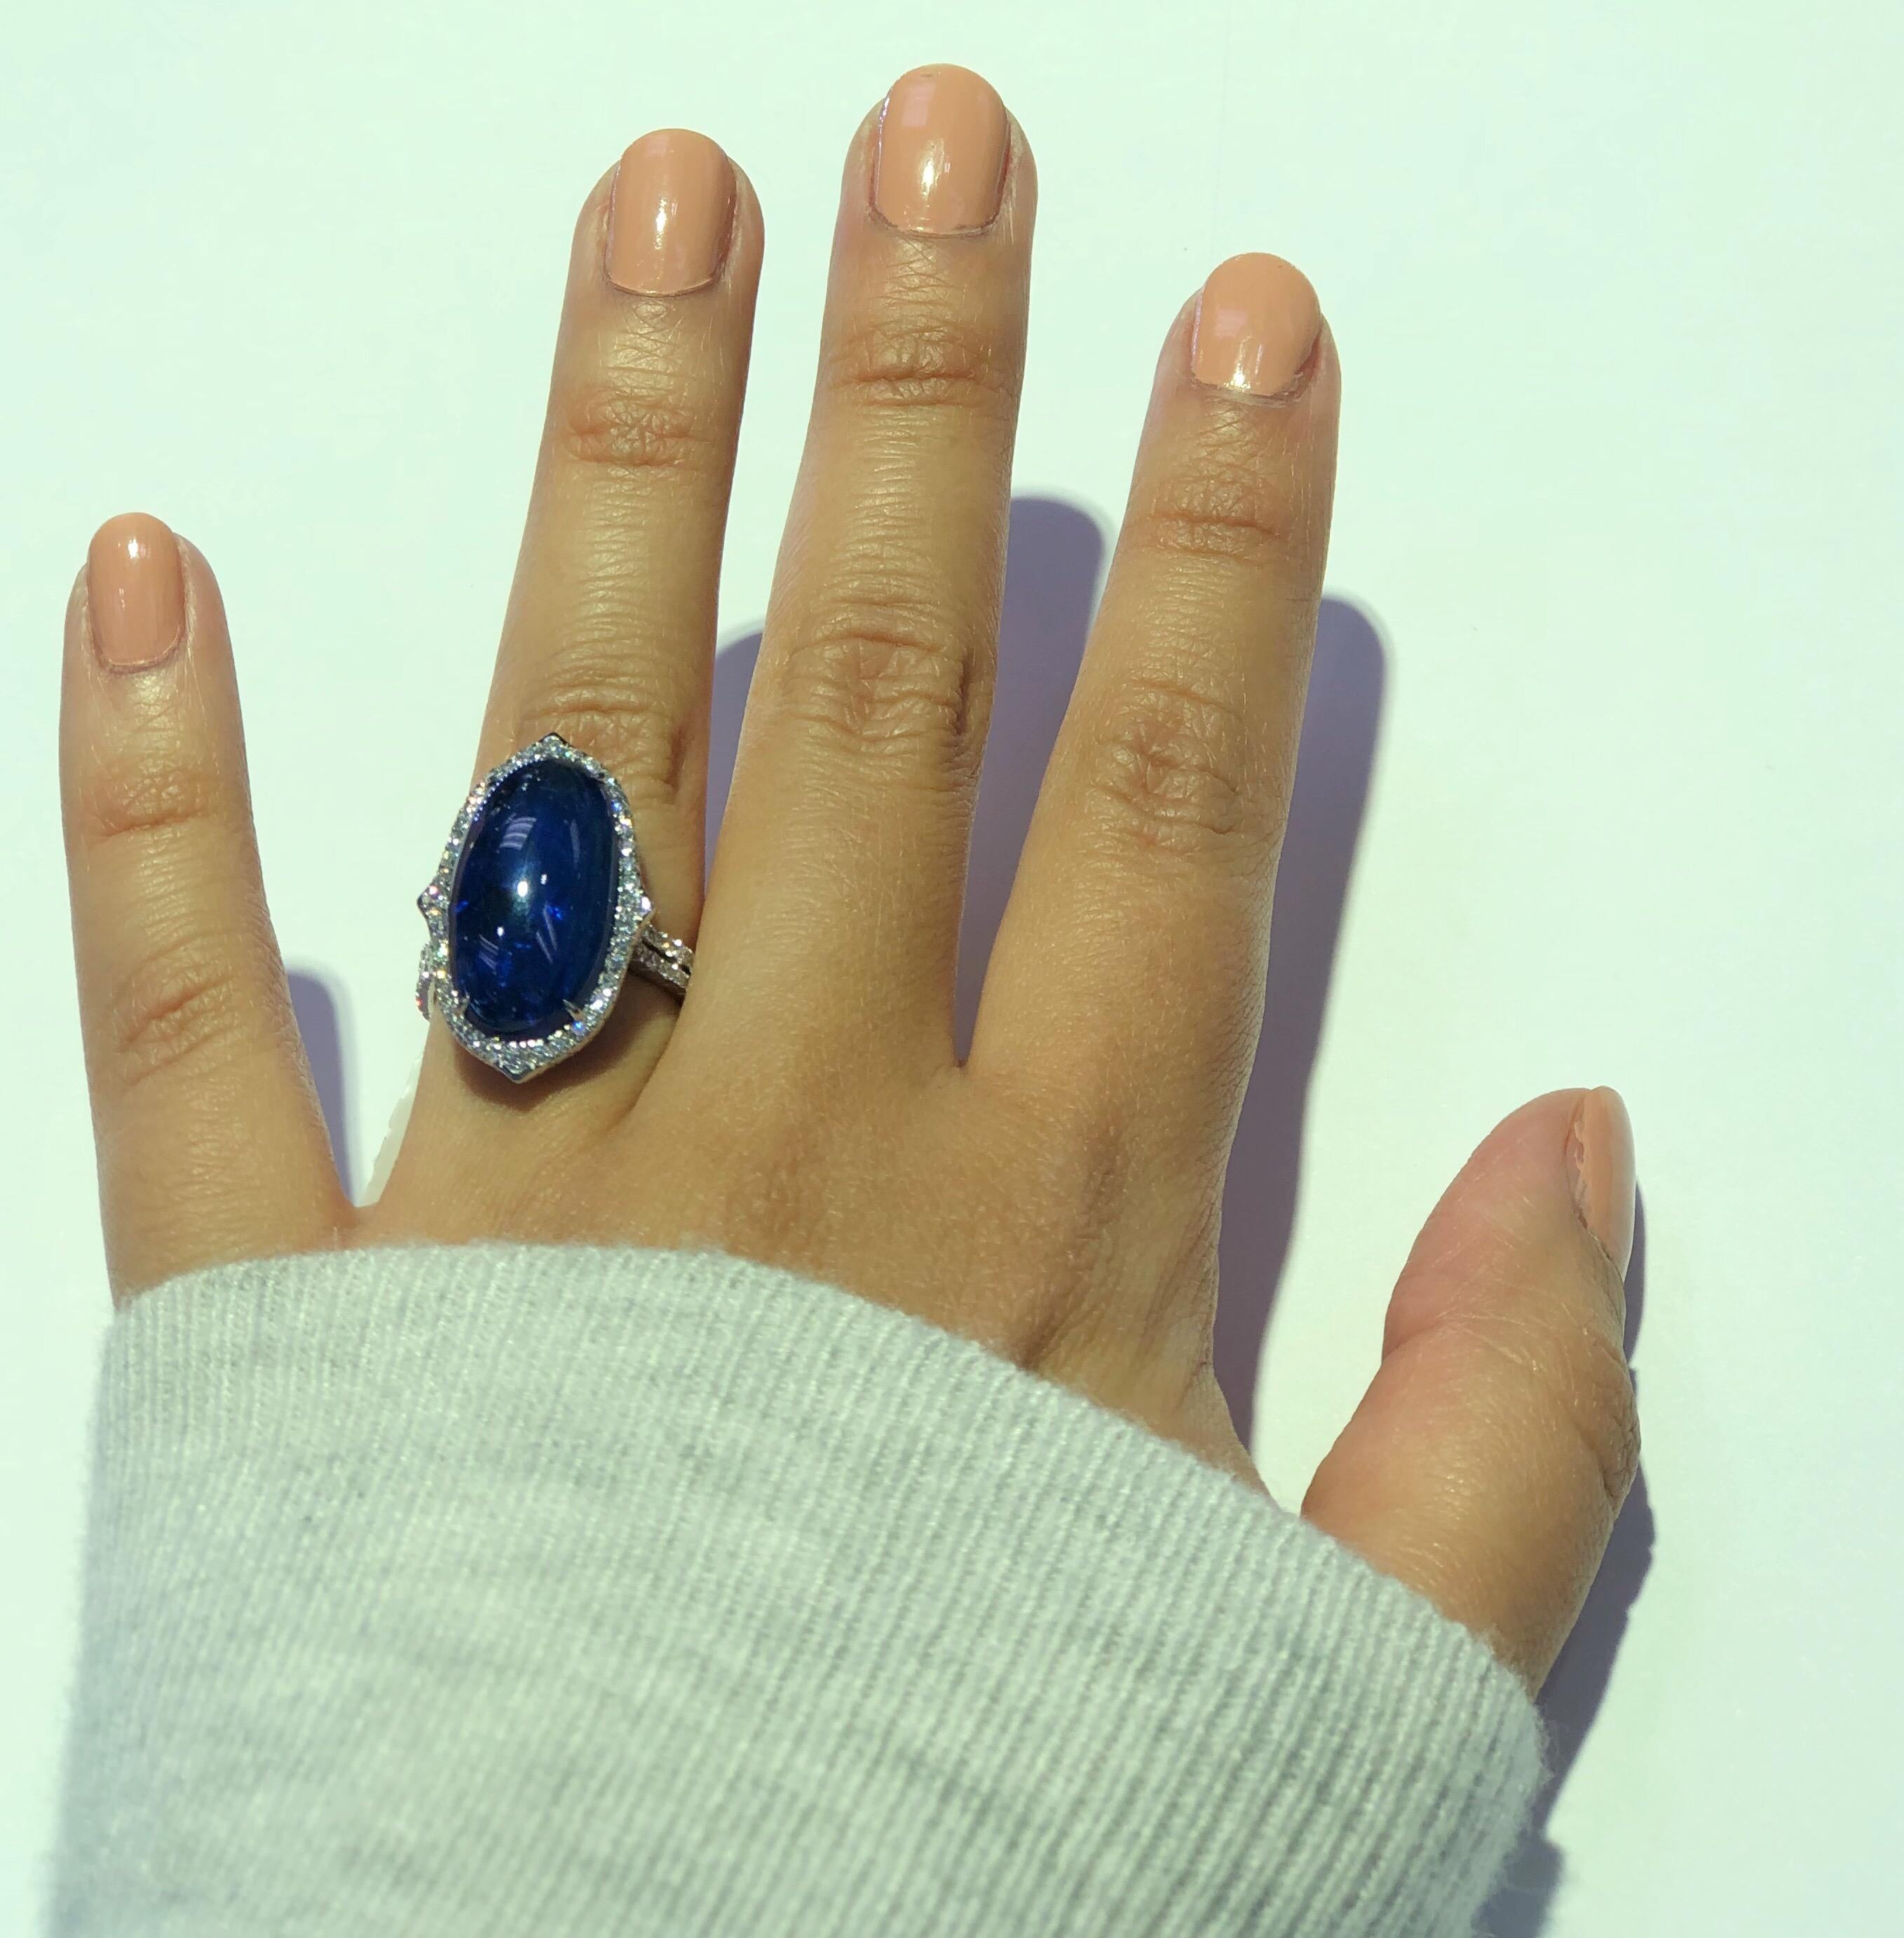 Women's 13.91 Carat Unheated Blue Cabochon Burmese Sapphire Ring with Diamond Accents